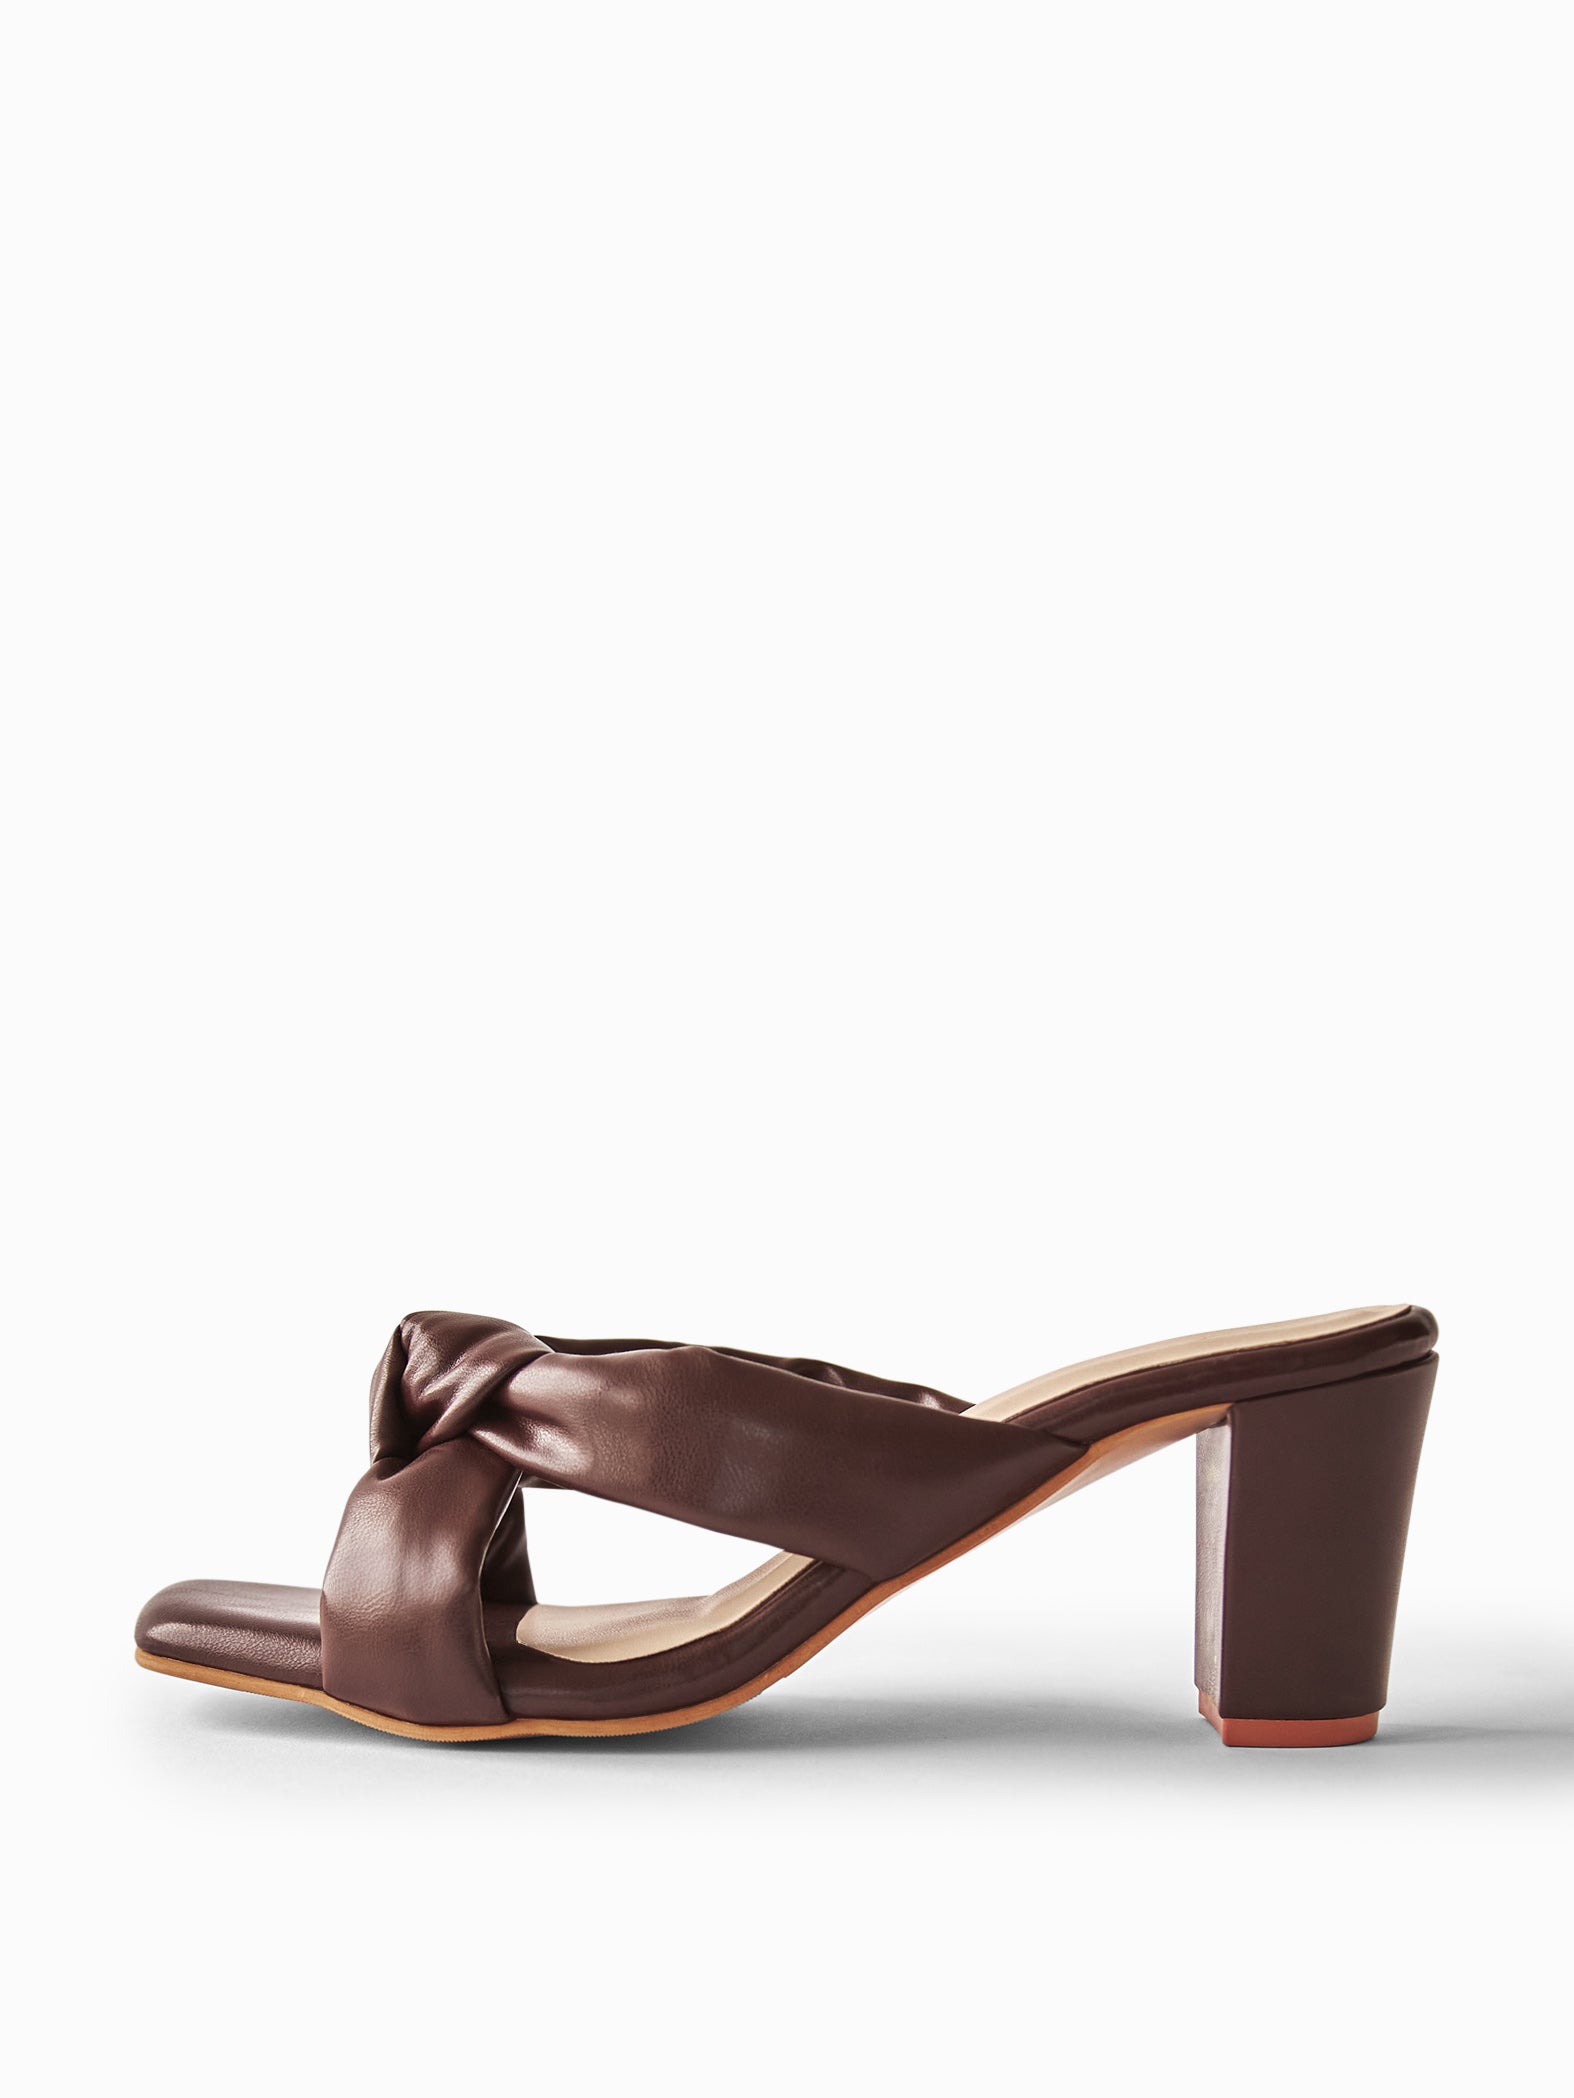 Cocoa Knotted Block Heels